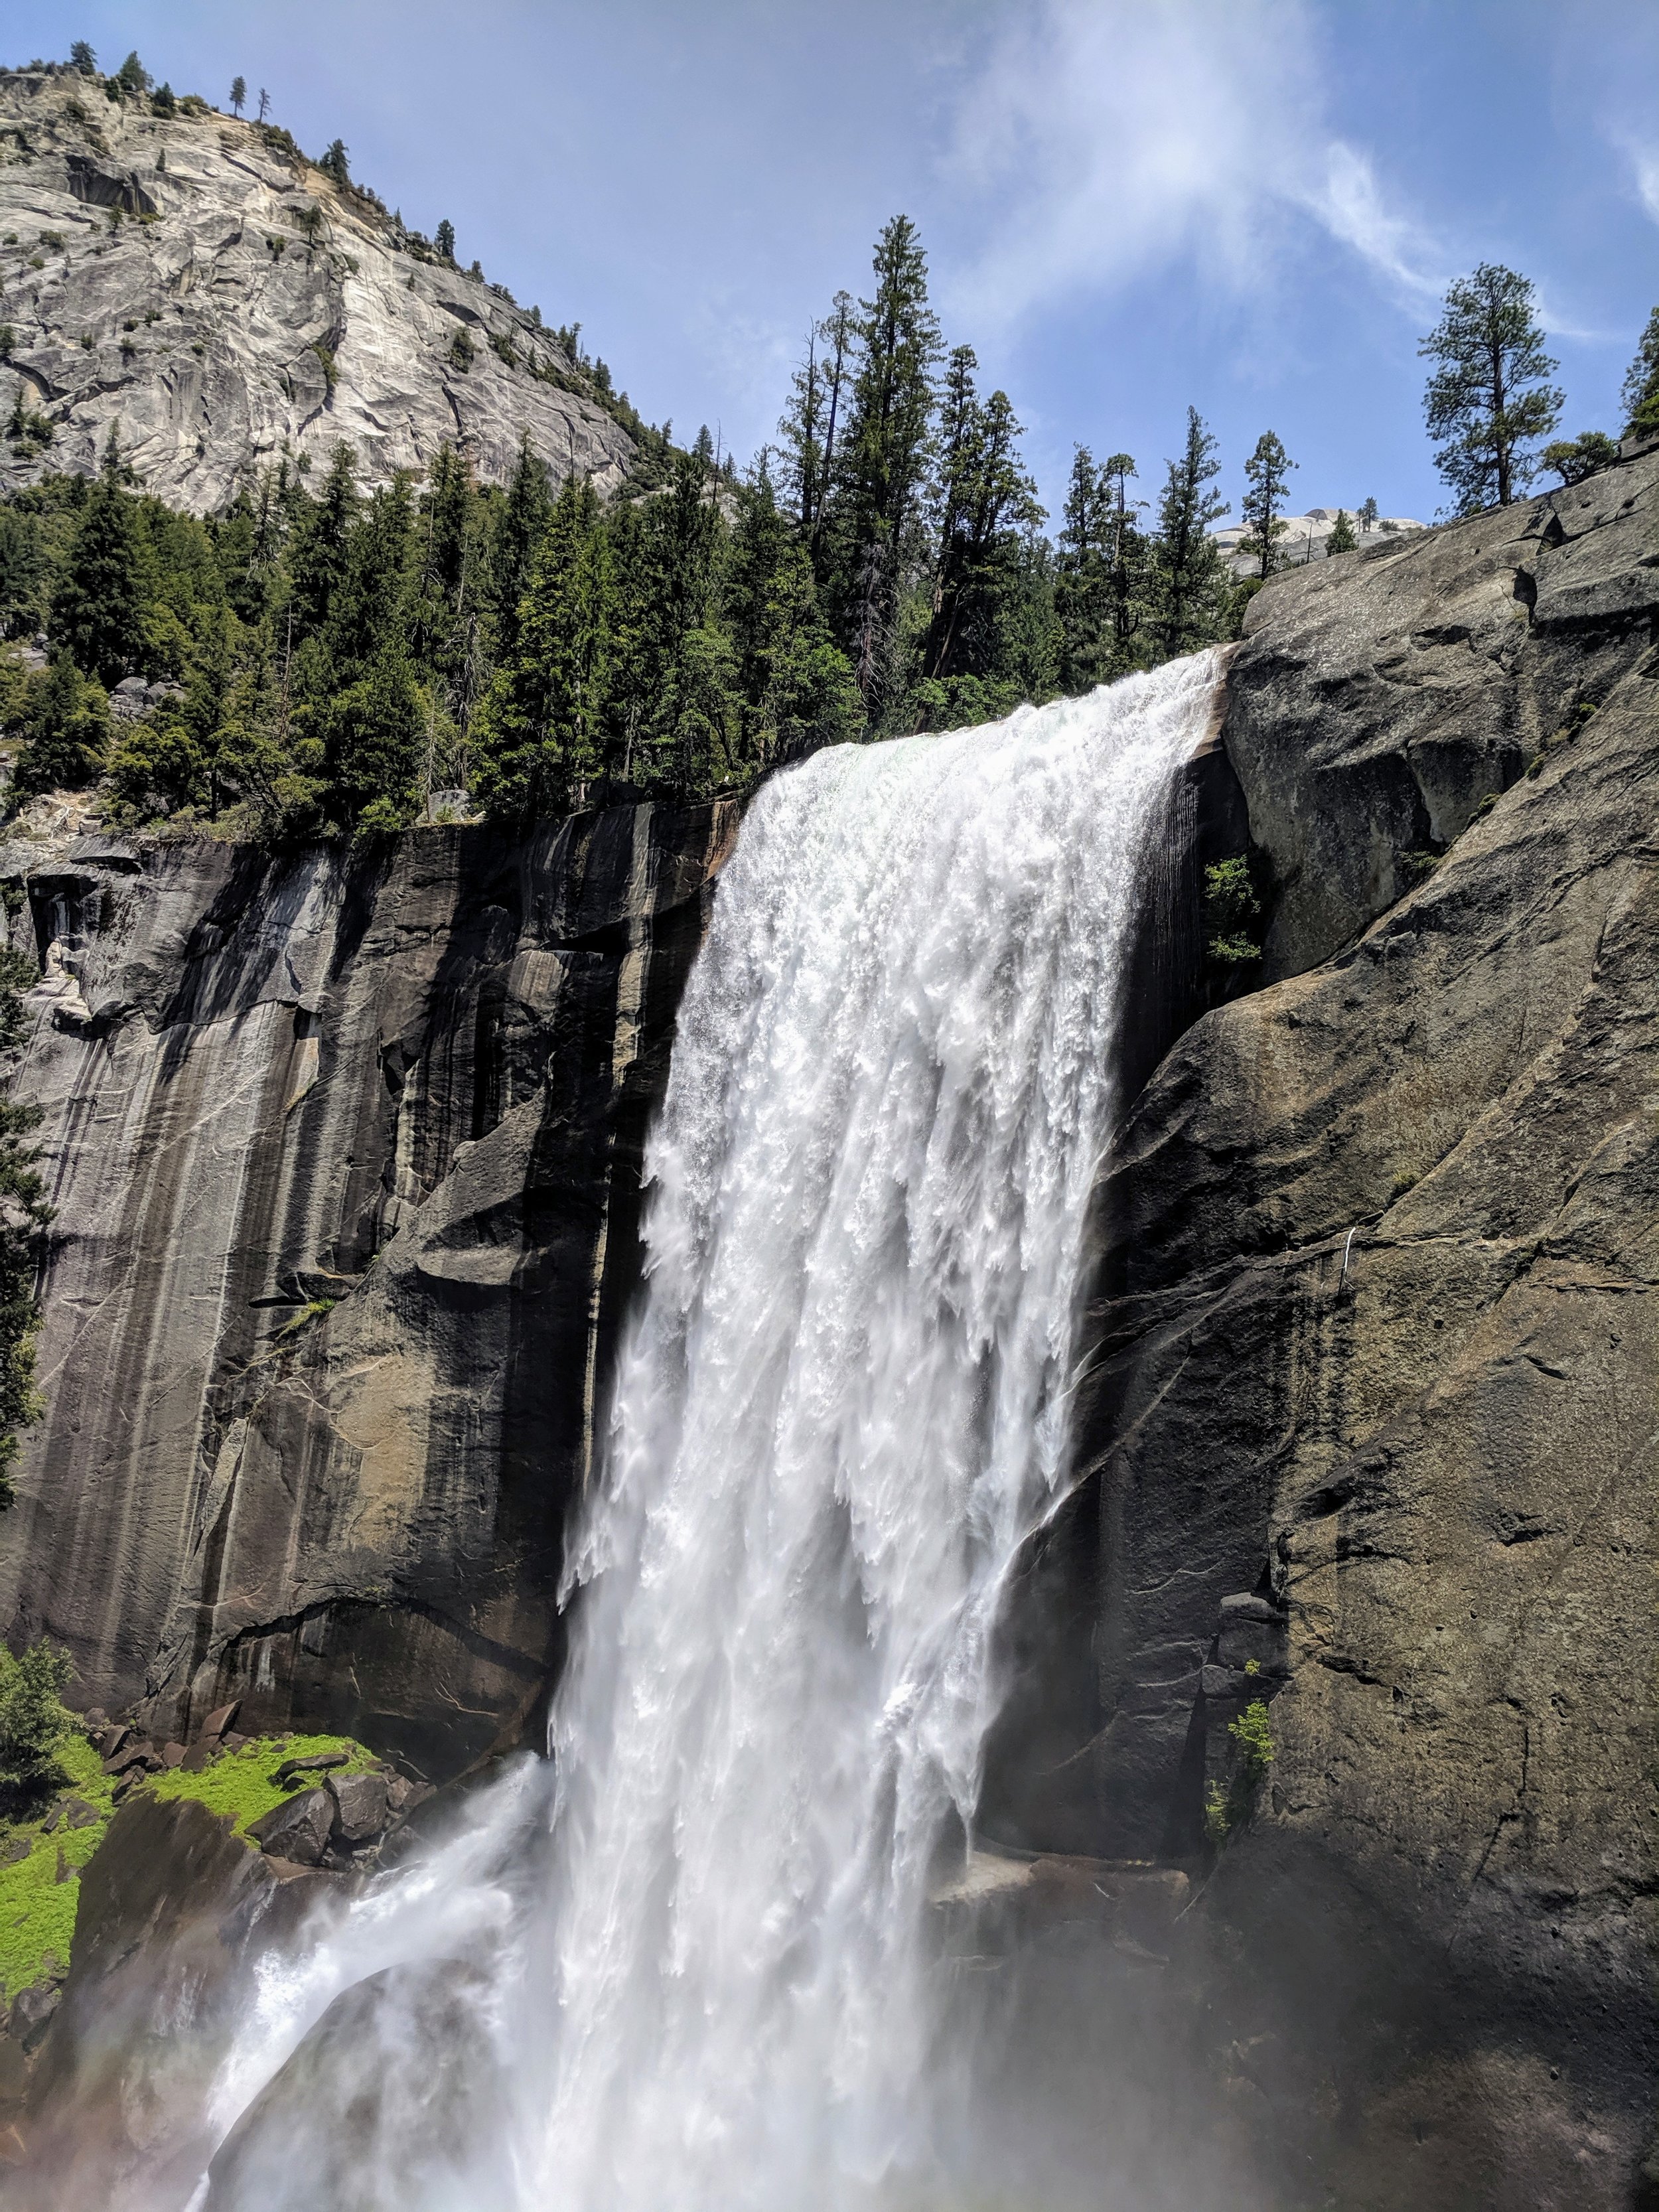  Vernal Falls as seen from the Mist Trail in Yosemite 